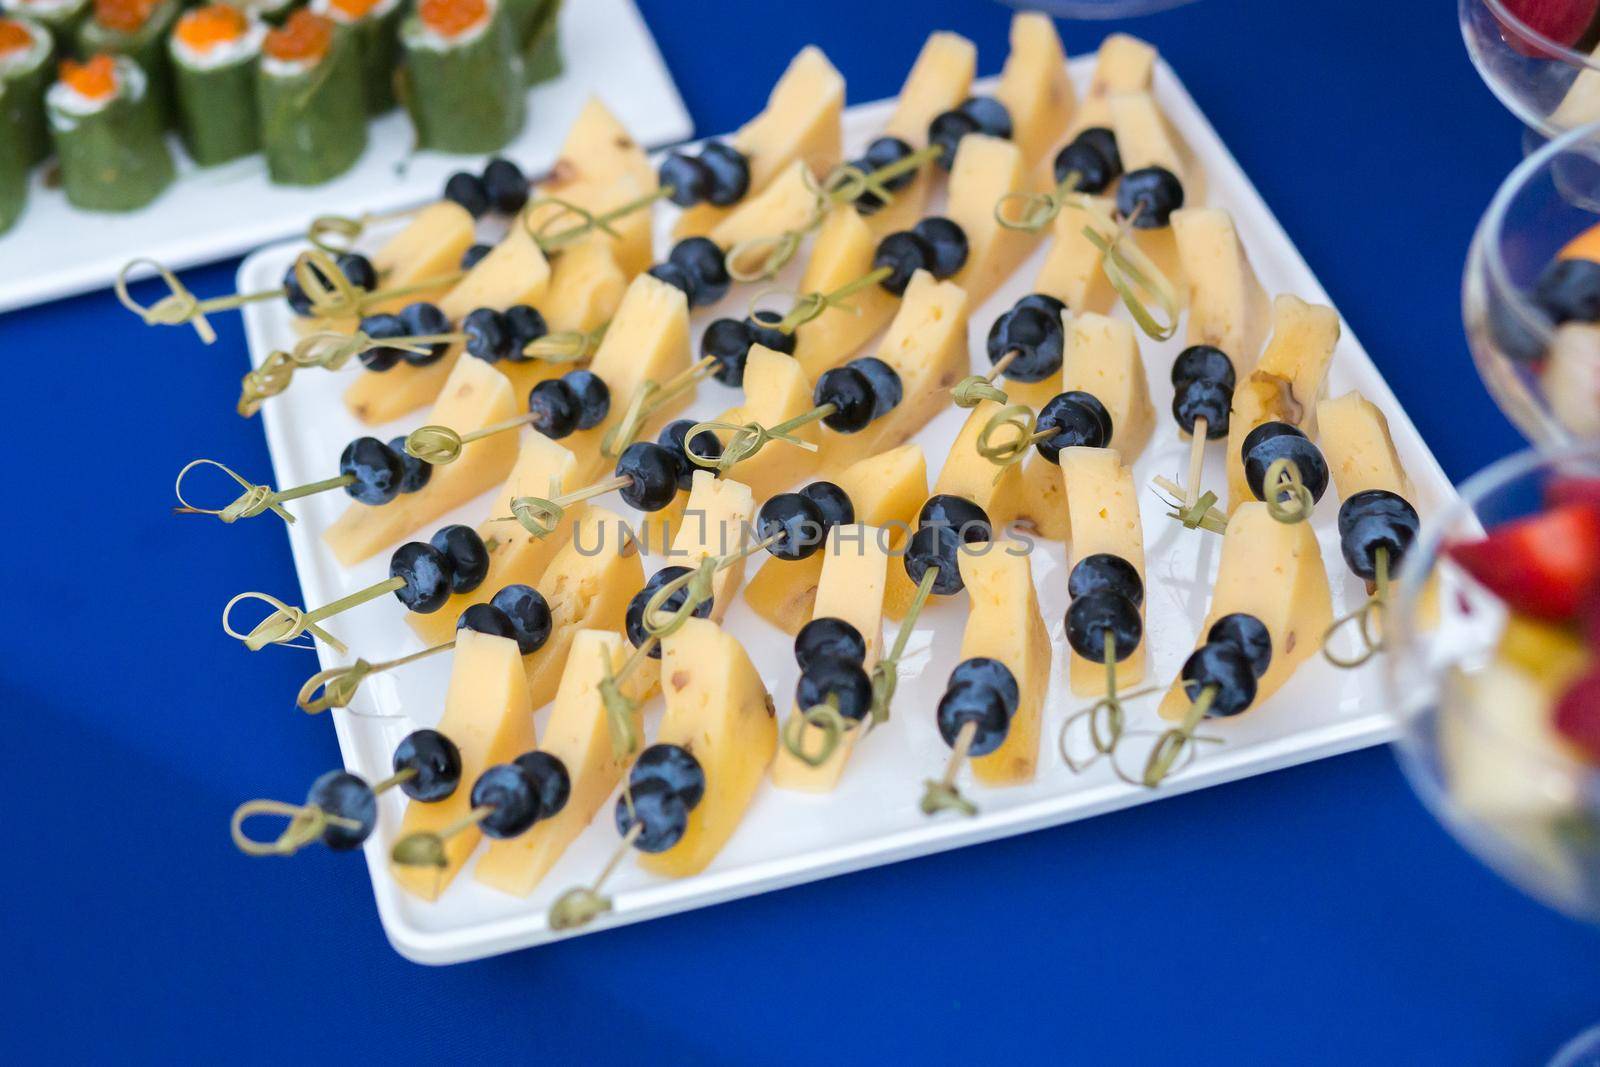 Snacks on the table at a festive event or dinner